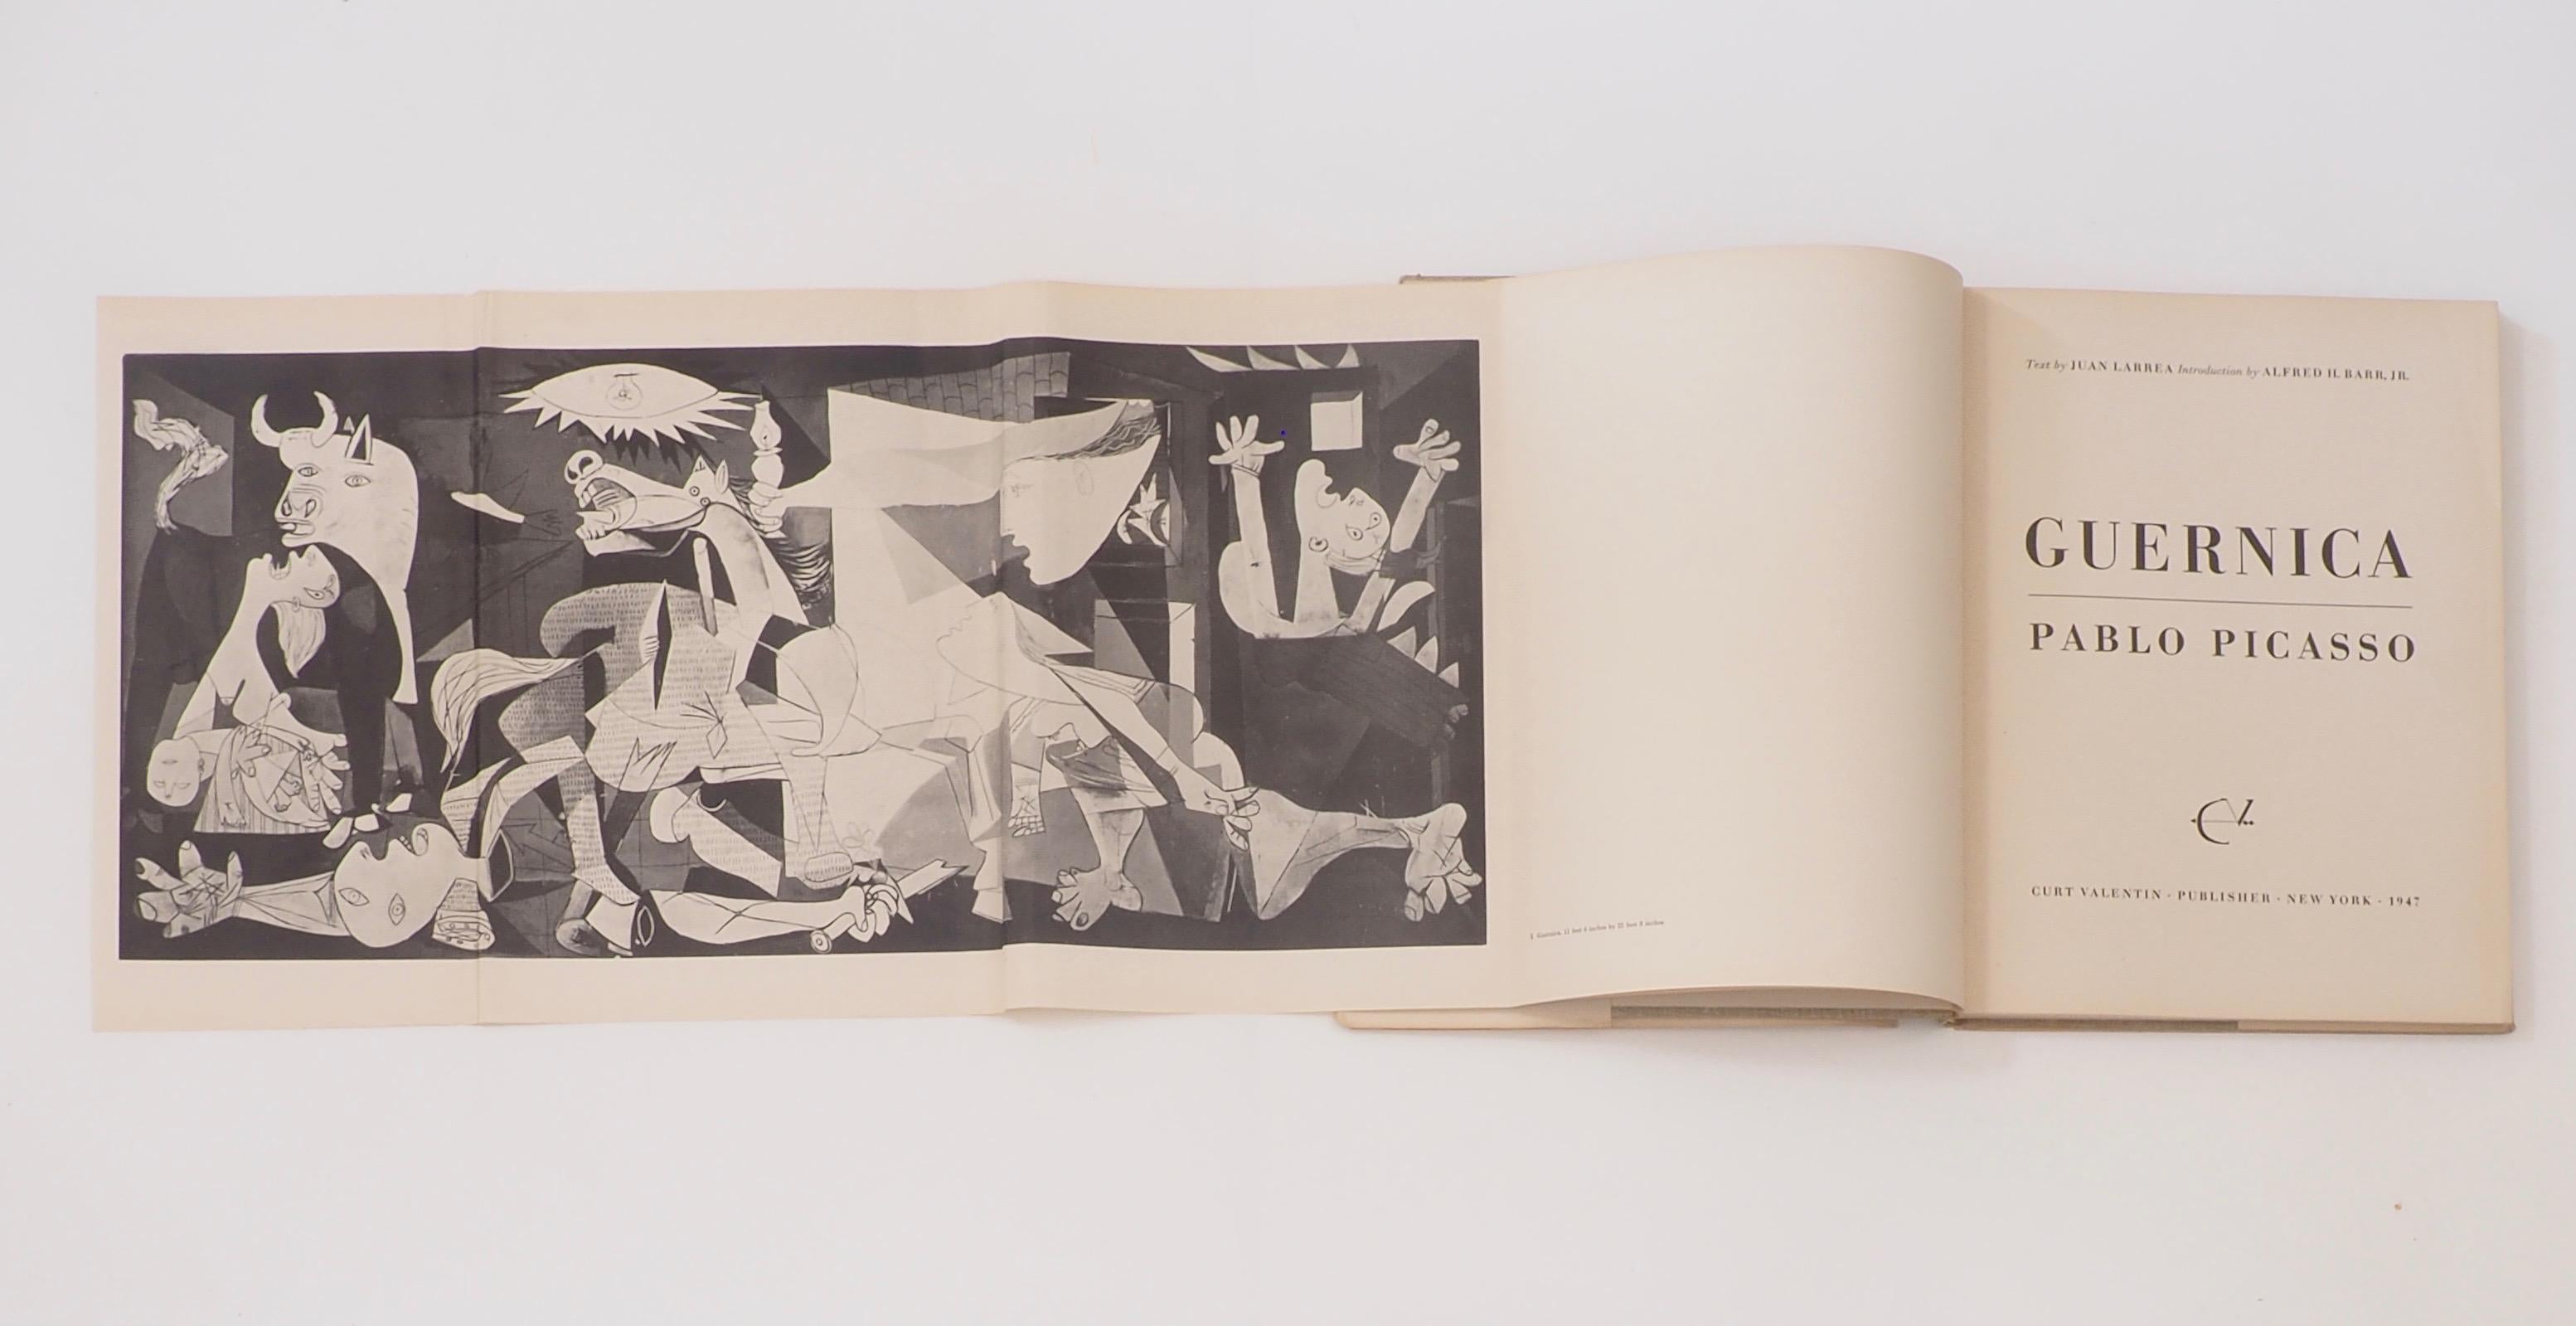 Picasso - Guernica. Published by Curt Valentin, New York, 1947. First Edition. 
By Alfred H. Barr (then director of the Museum of Modern Art, New York). 

A beautiful book, rare to find in such a good dust jacket.
The first major English Language